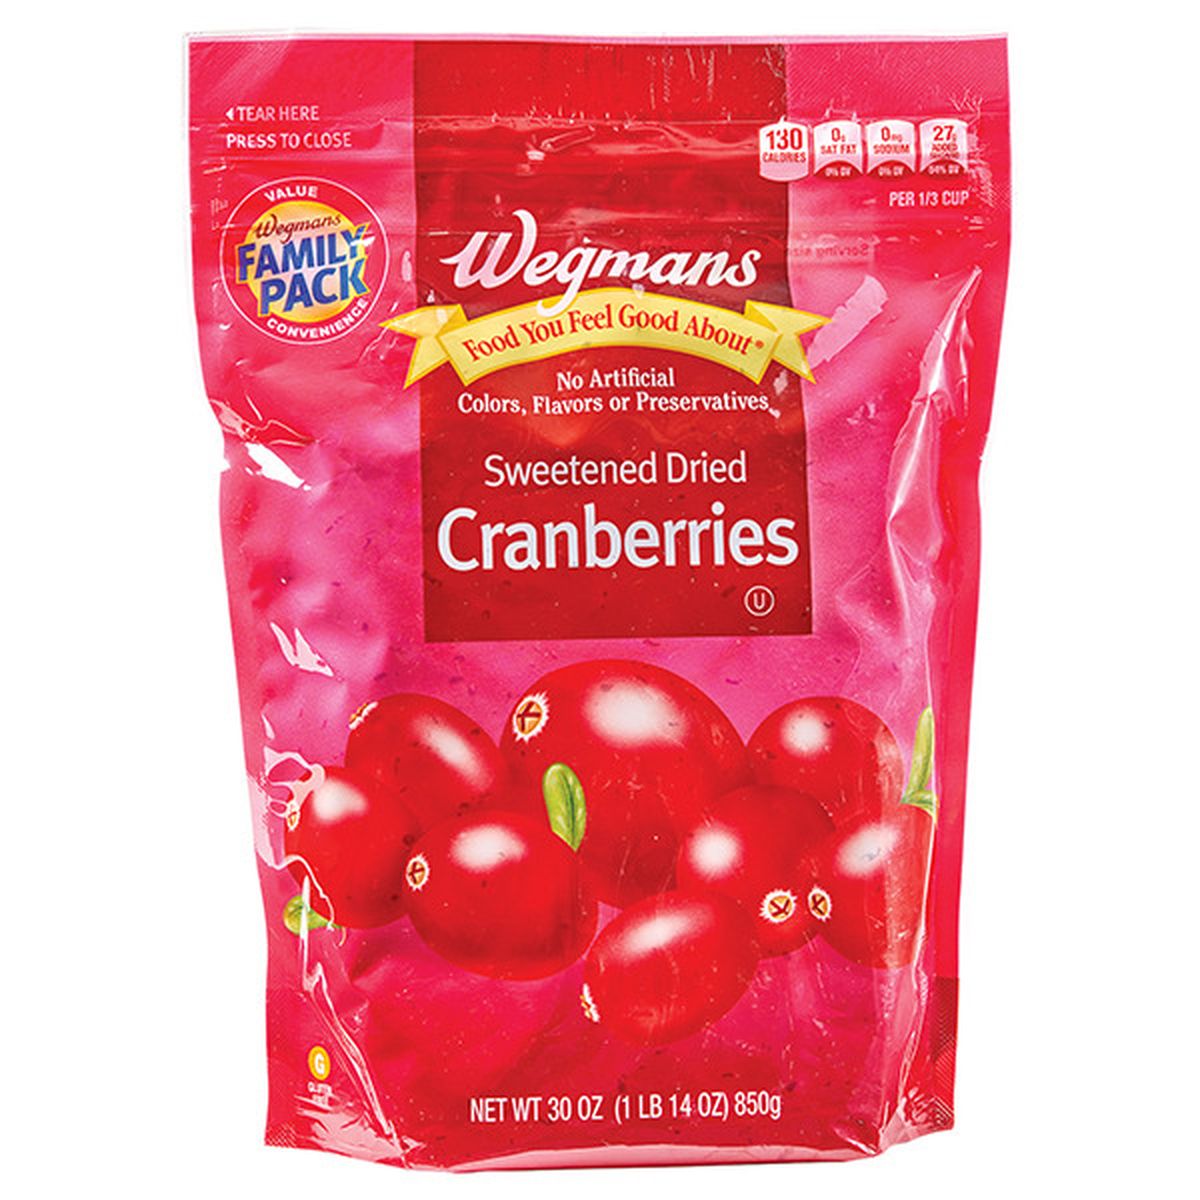 Calories in Wegmans Sweetened Dried Cranberries, FAMILY PACK